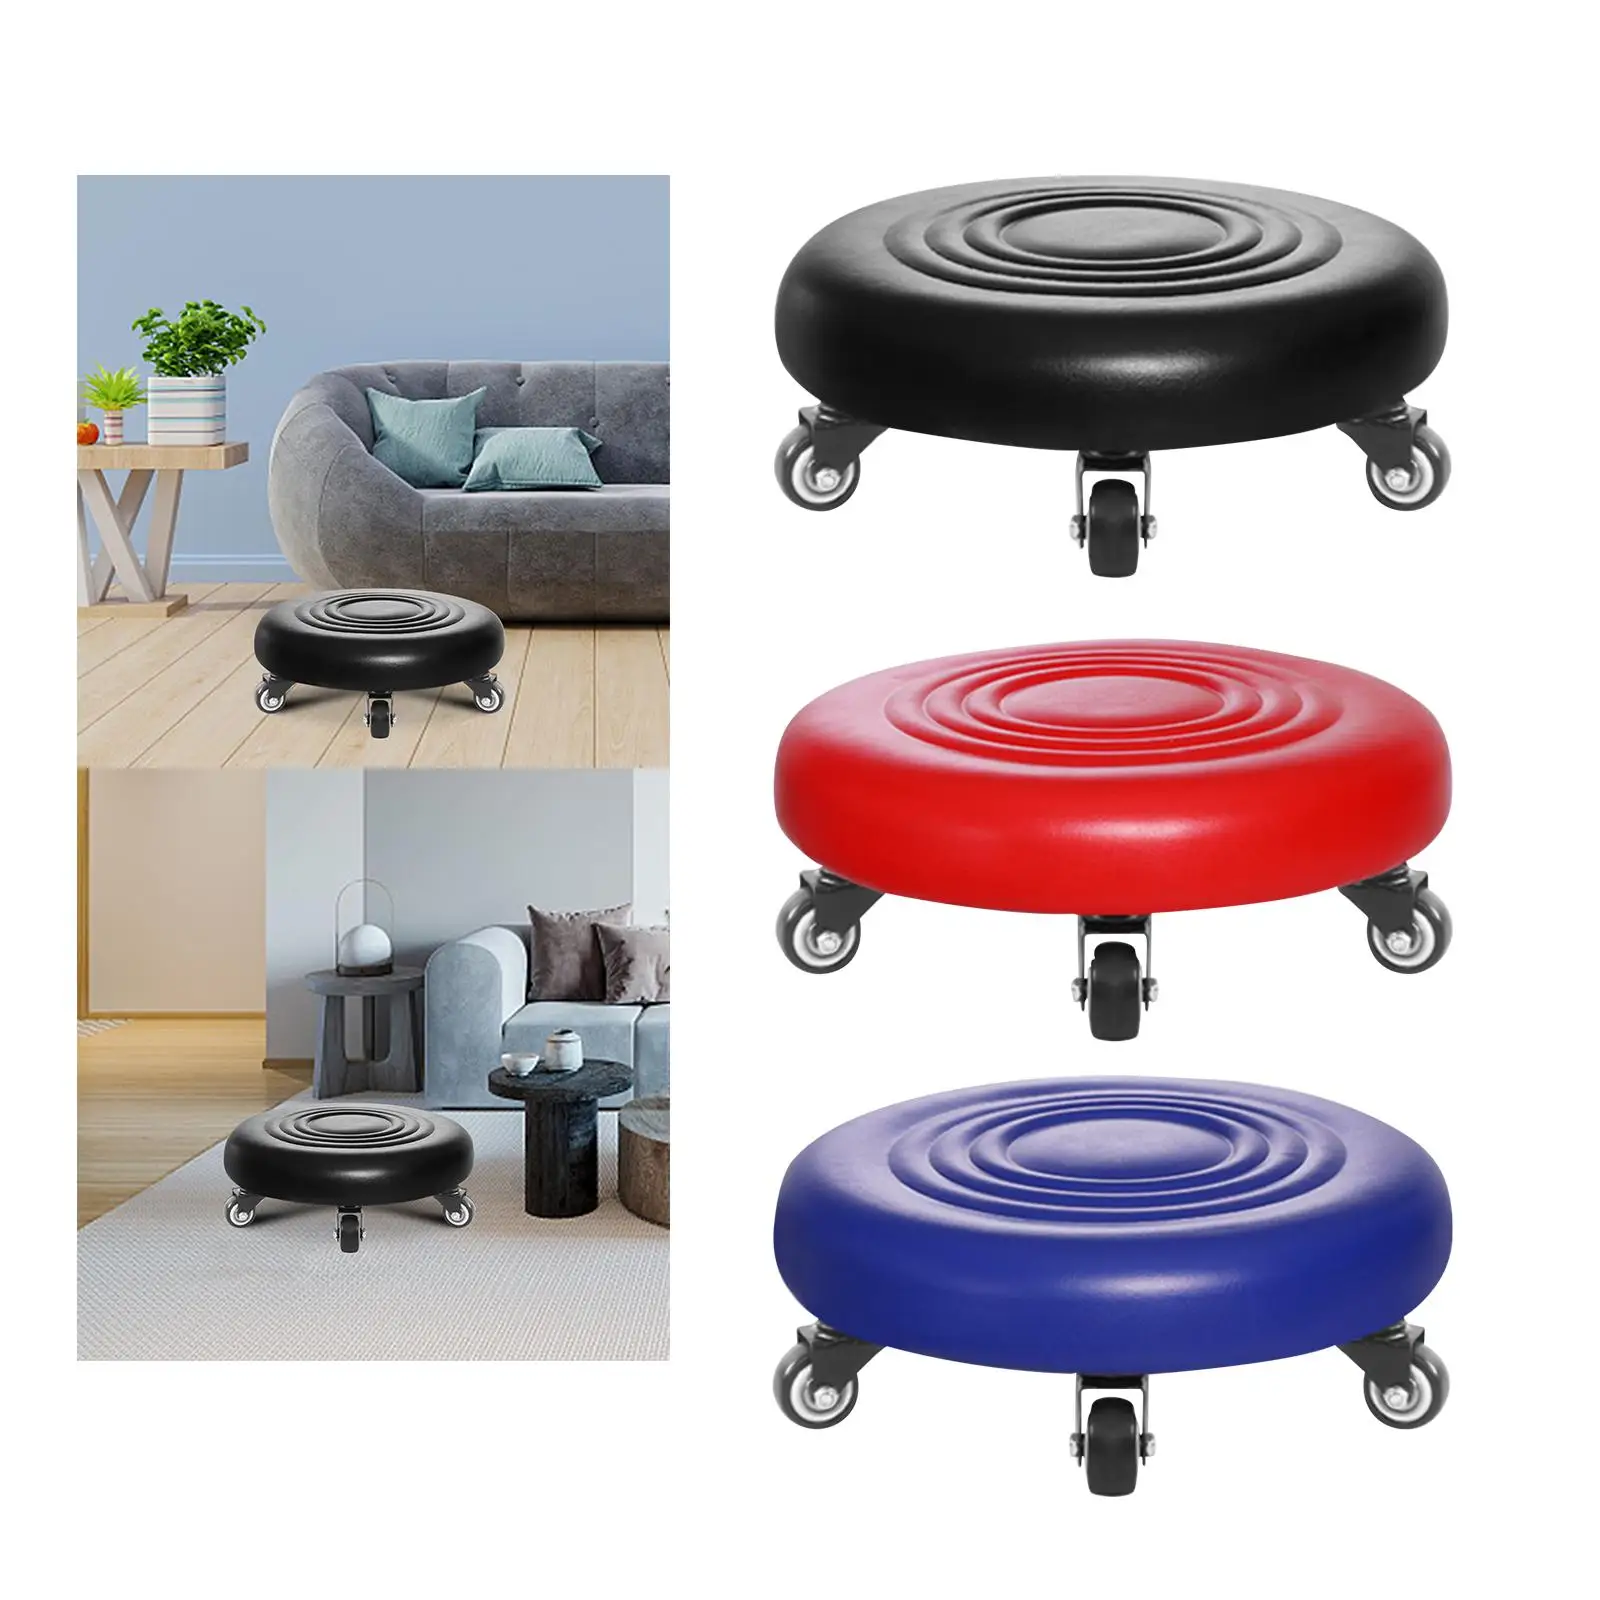 Pulley Stool Low Rolling Stool Low Roller Seat Stool for Home Kitchen Office Sport